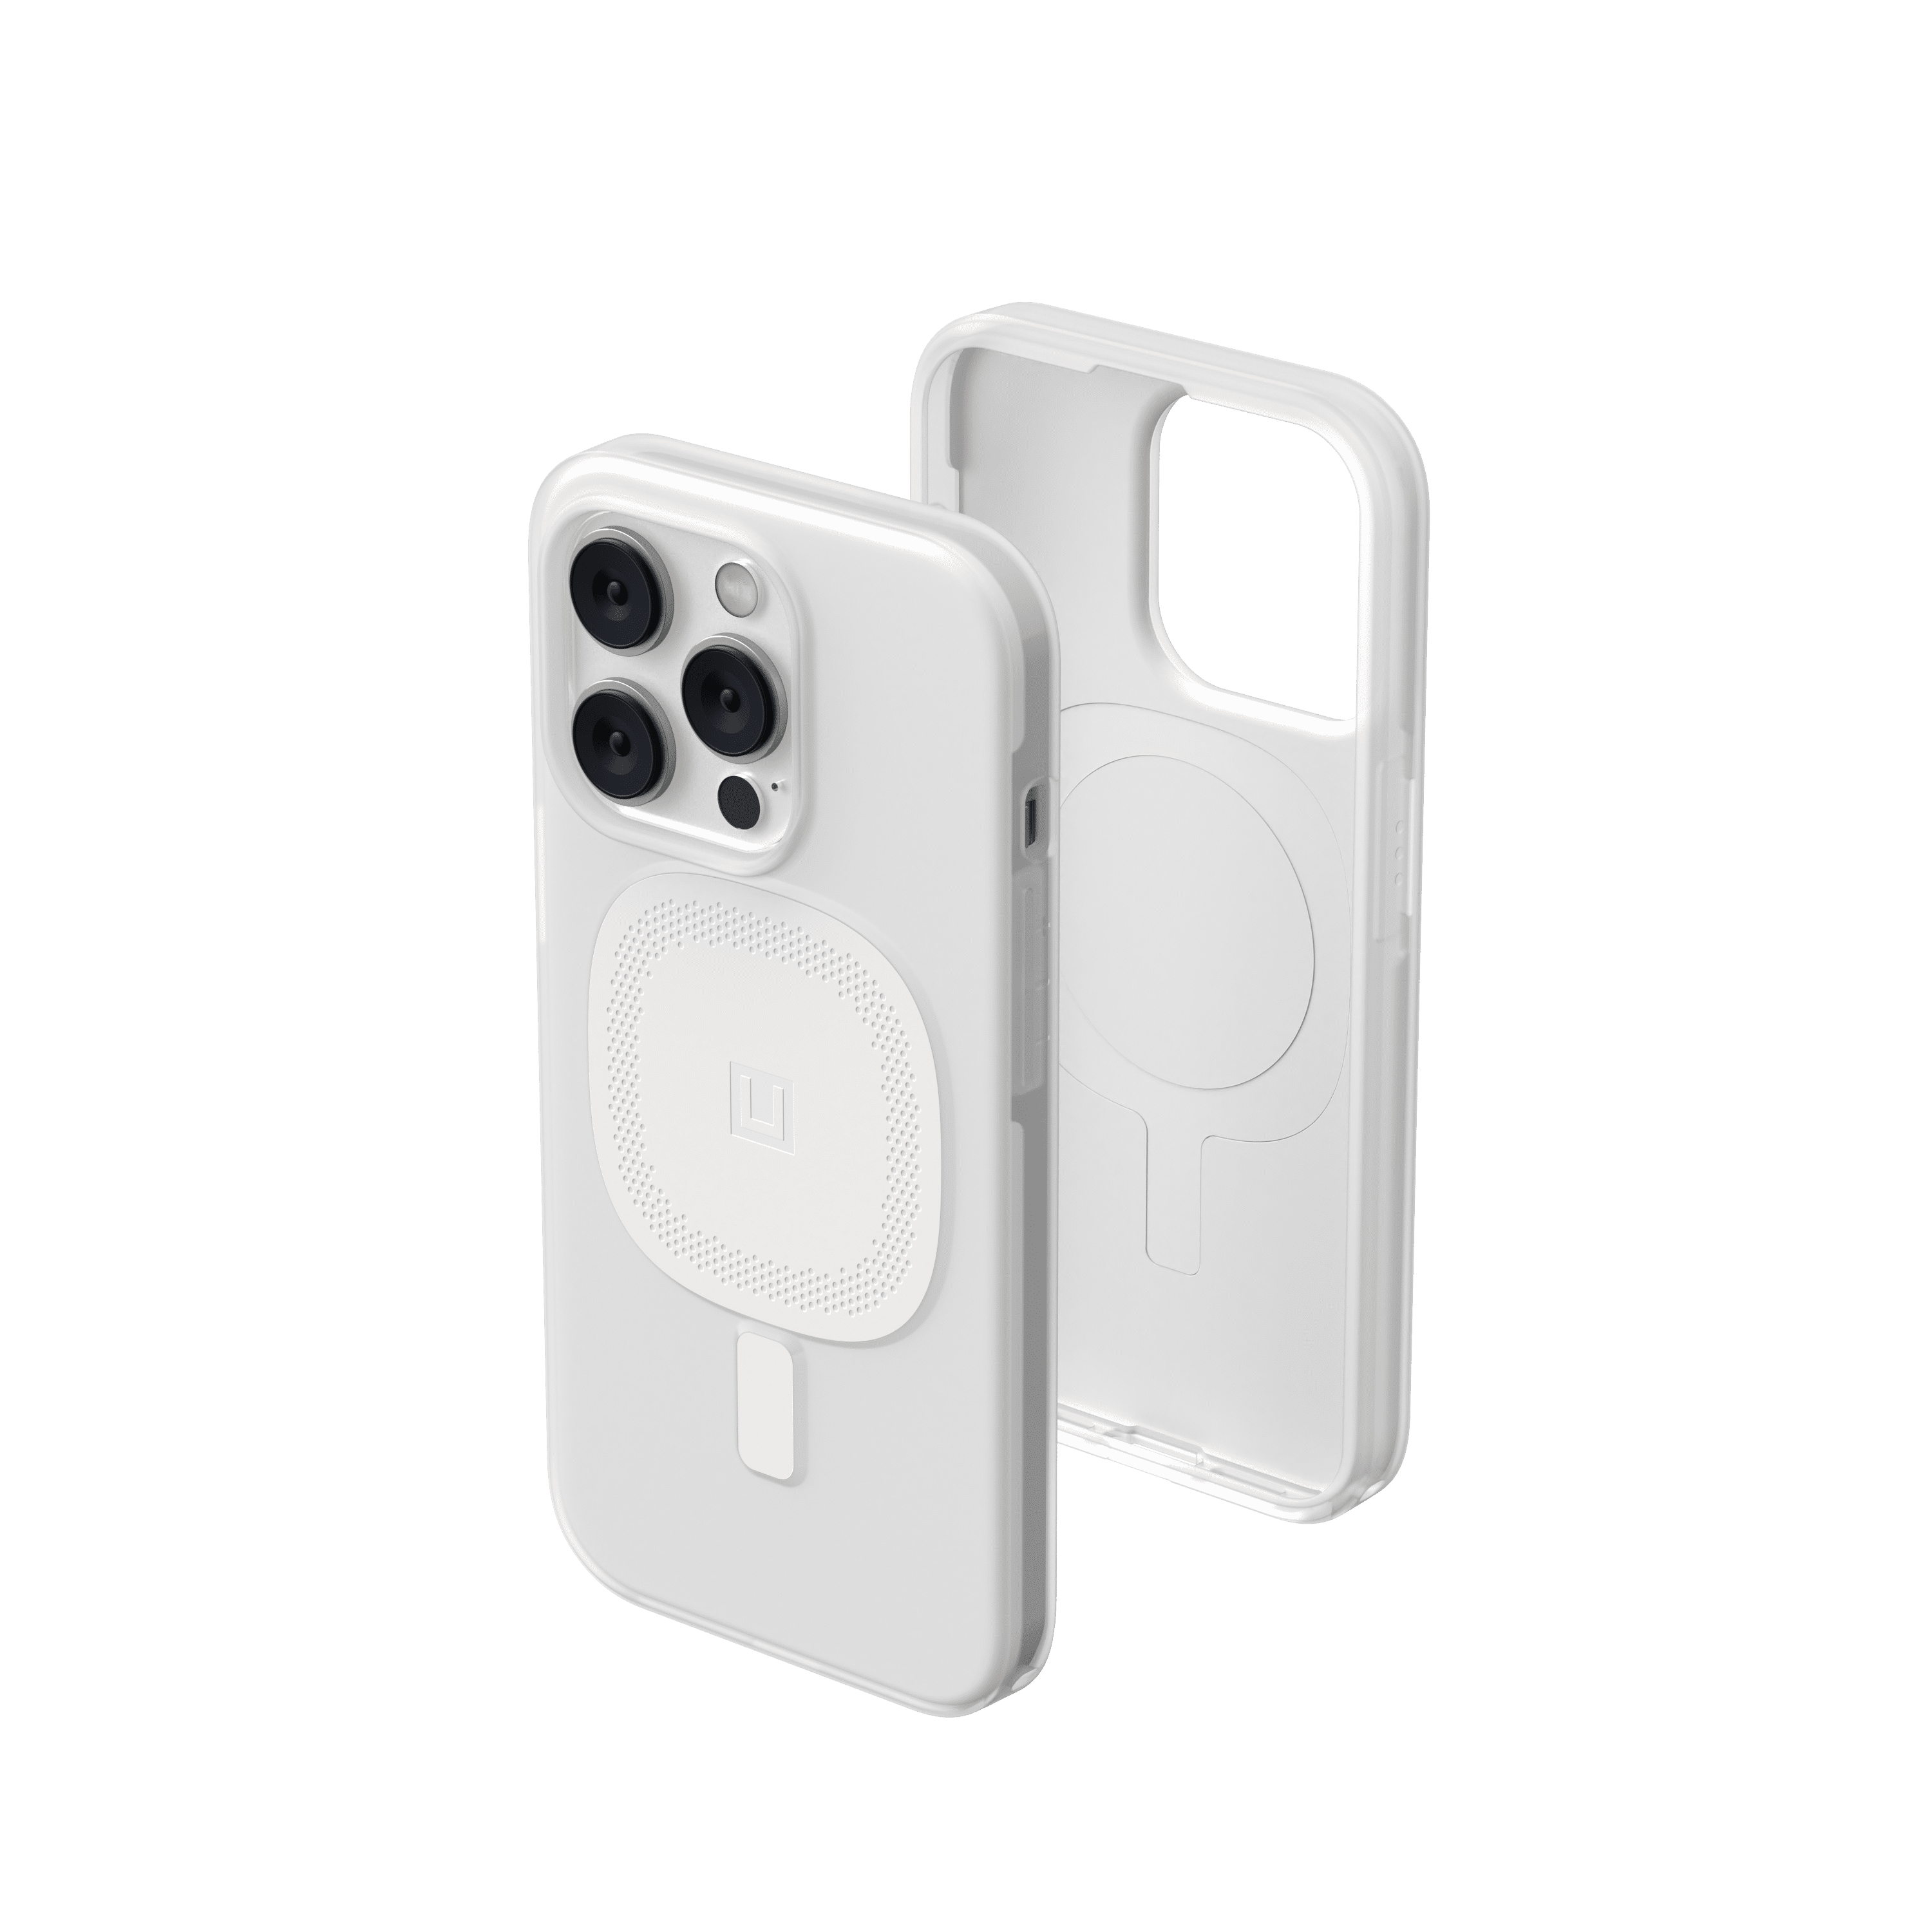 U] by UAG Designed for iPhone 14 Pro Case White Marshmallow 6.1 Lucent 2.0  Built-in Magnet Compatible with MagSafe Charging Slim Lightweight Opaque  Protective Cover by URBAN ARMOR GEAR 